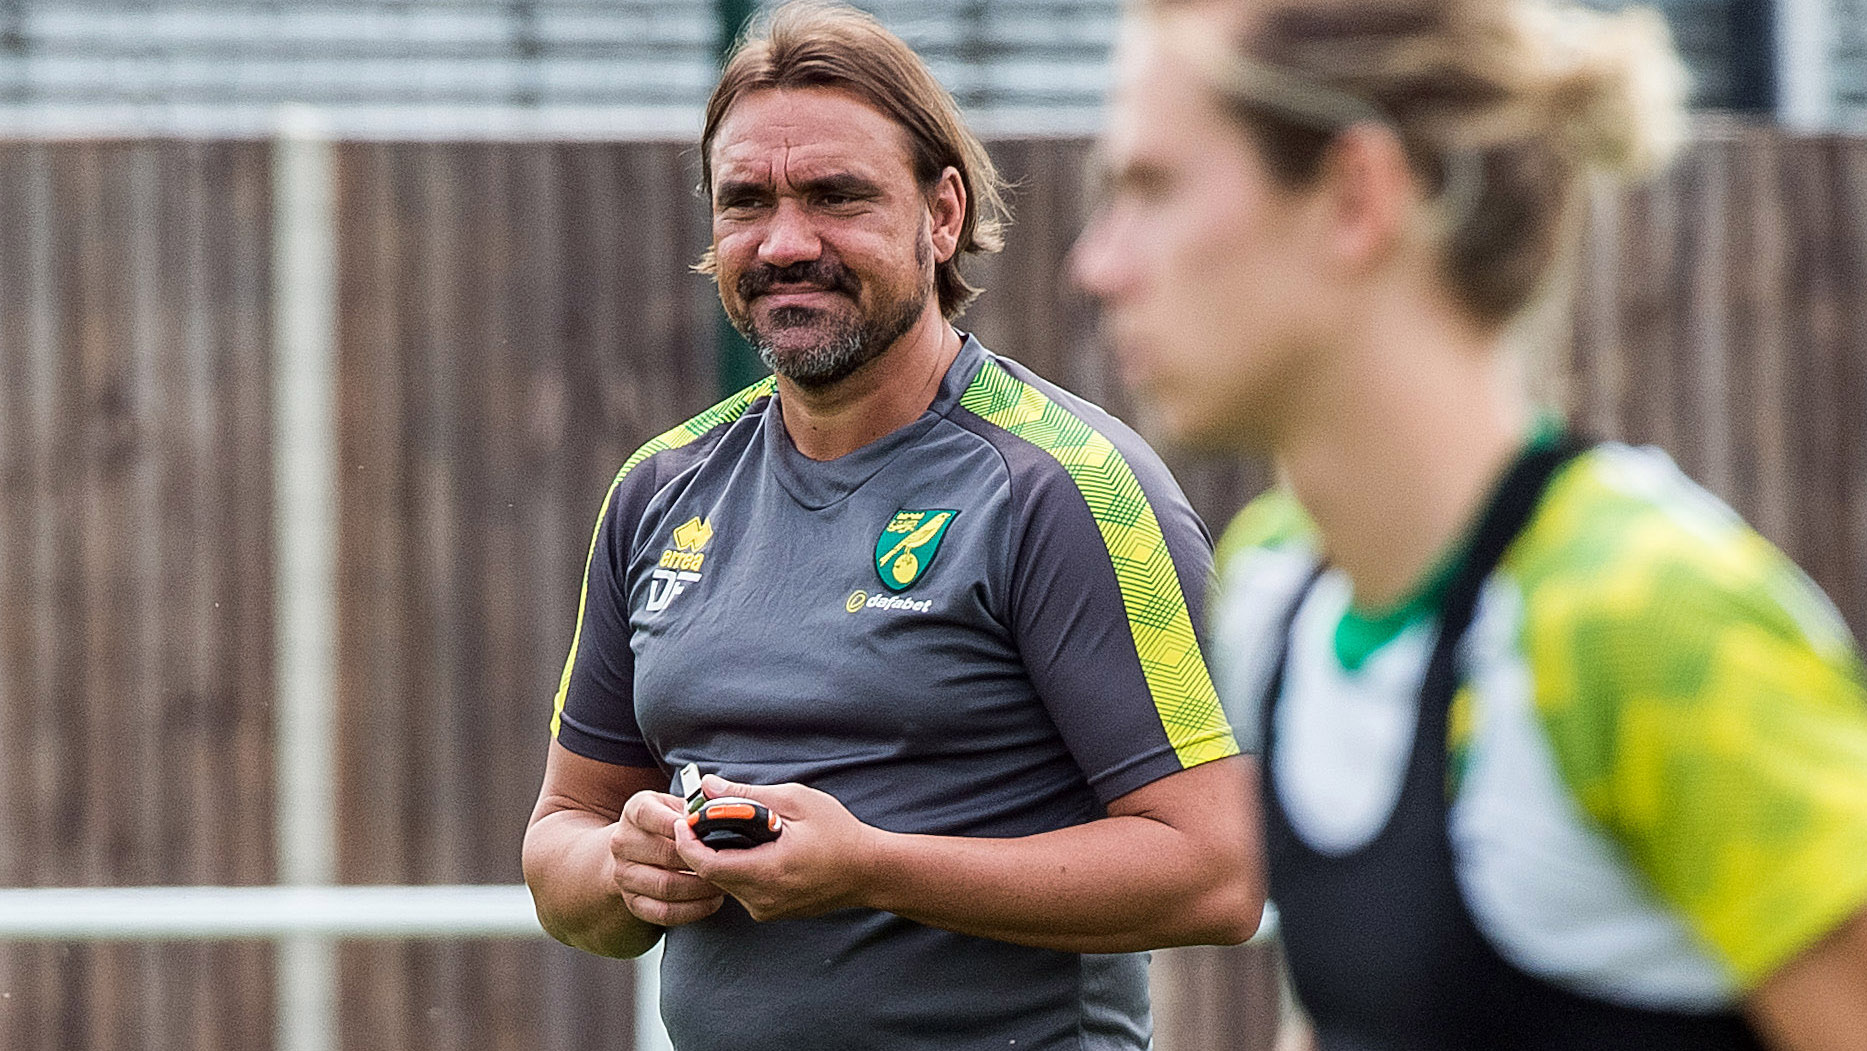 Norwich City dedicate this victory to our fans in a difficult season, confesses Daniel Farke